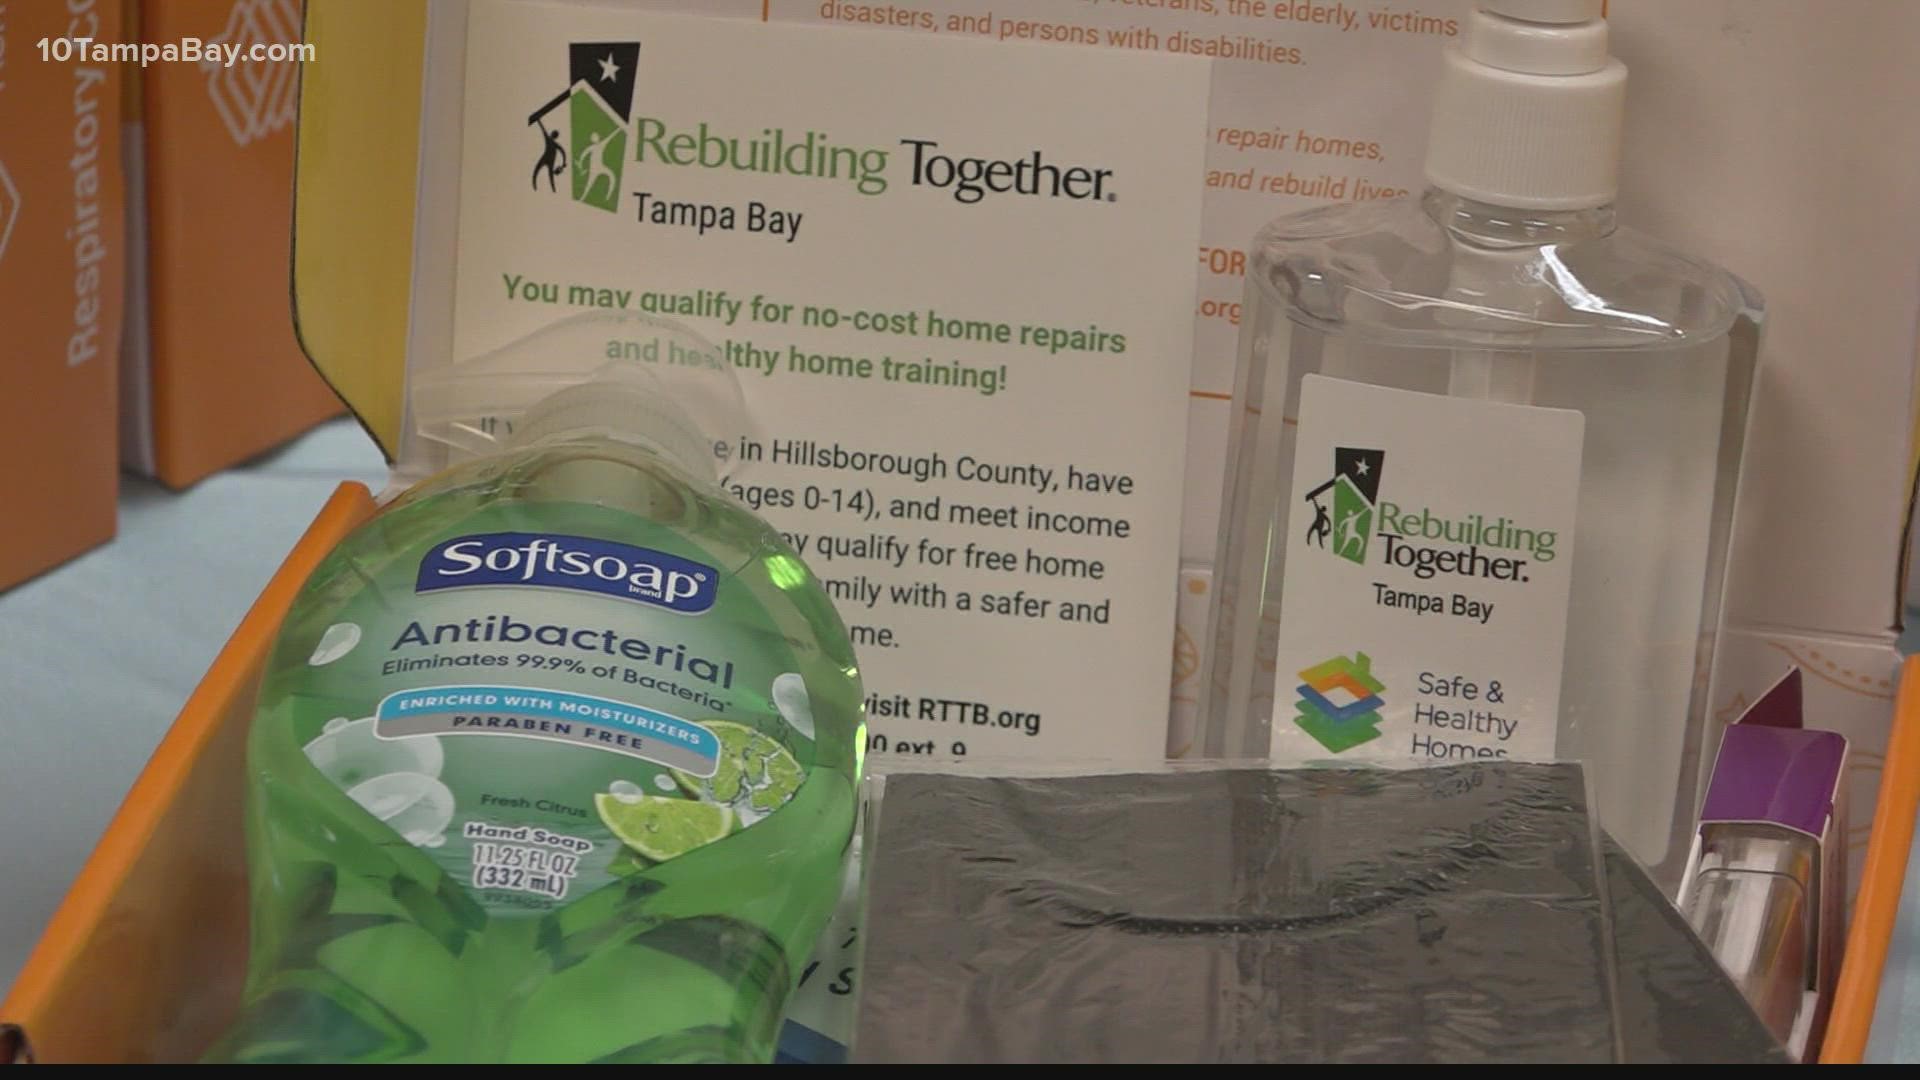 The Children's Board of Hillsborough County and Rebuilding Together Tampa Bay are pushing to keep younger kids safe as the vaccine is tested.